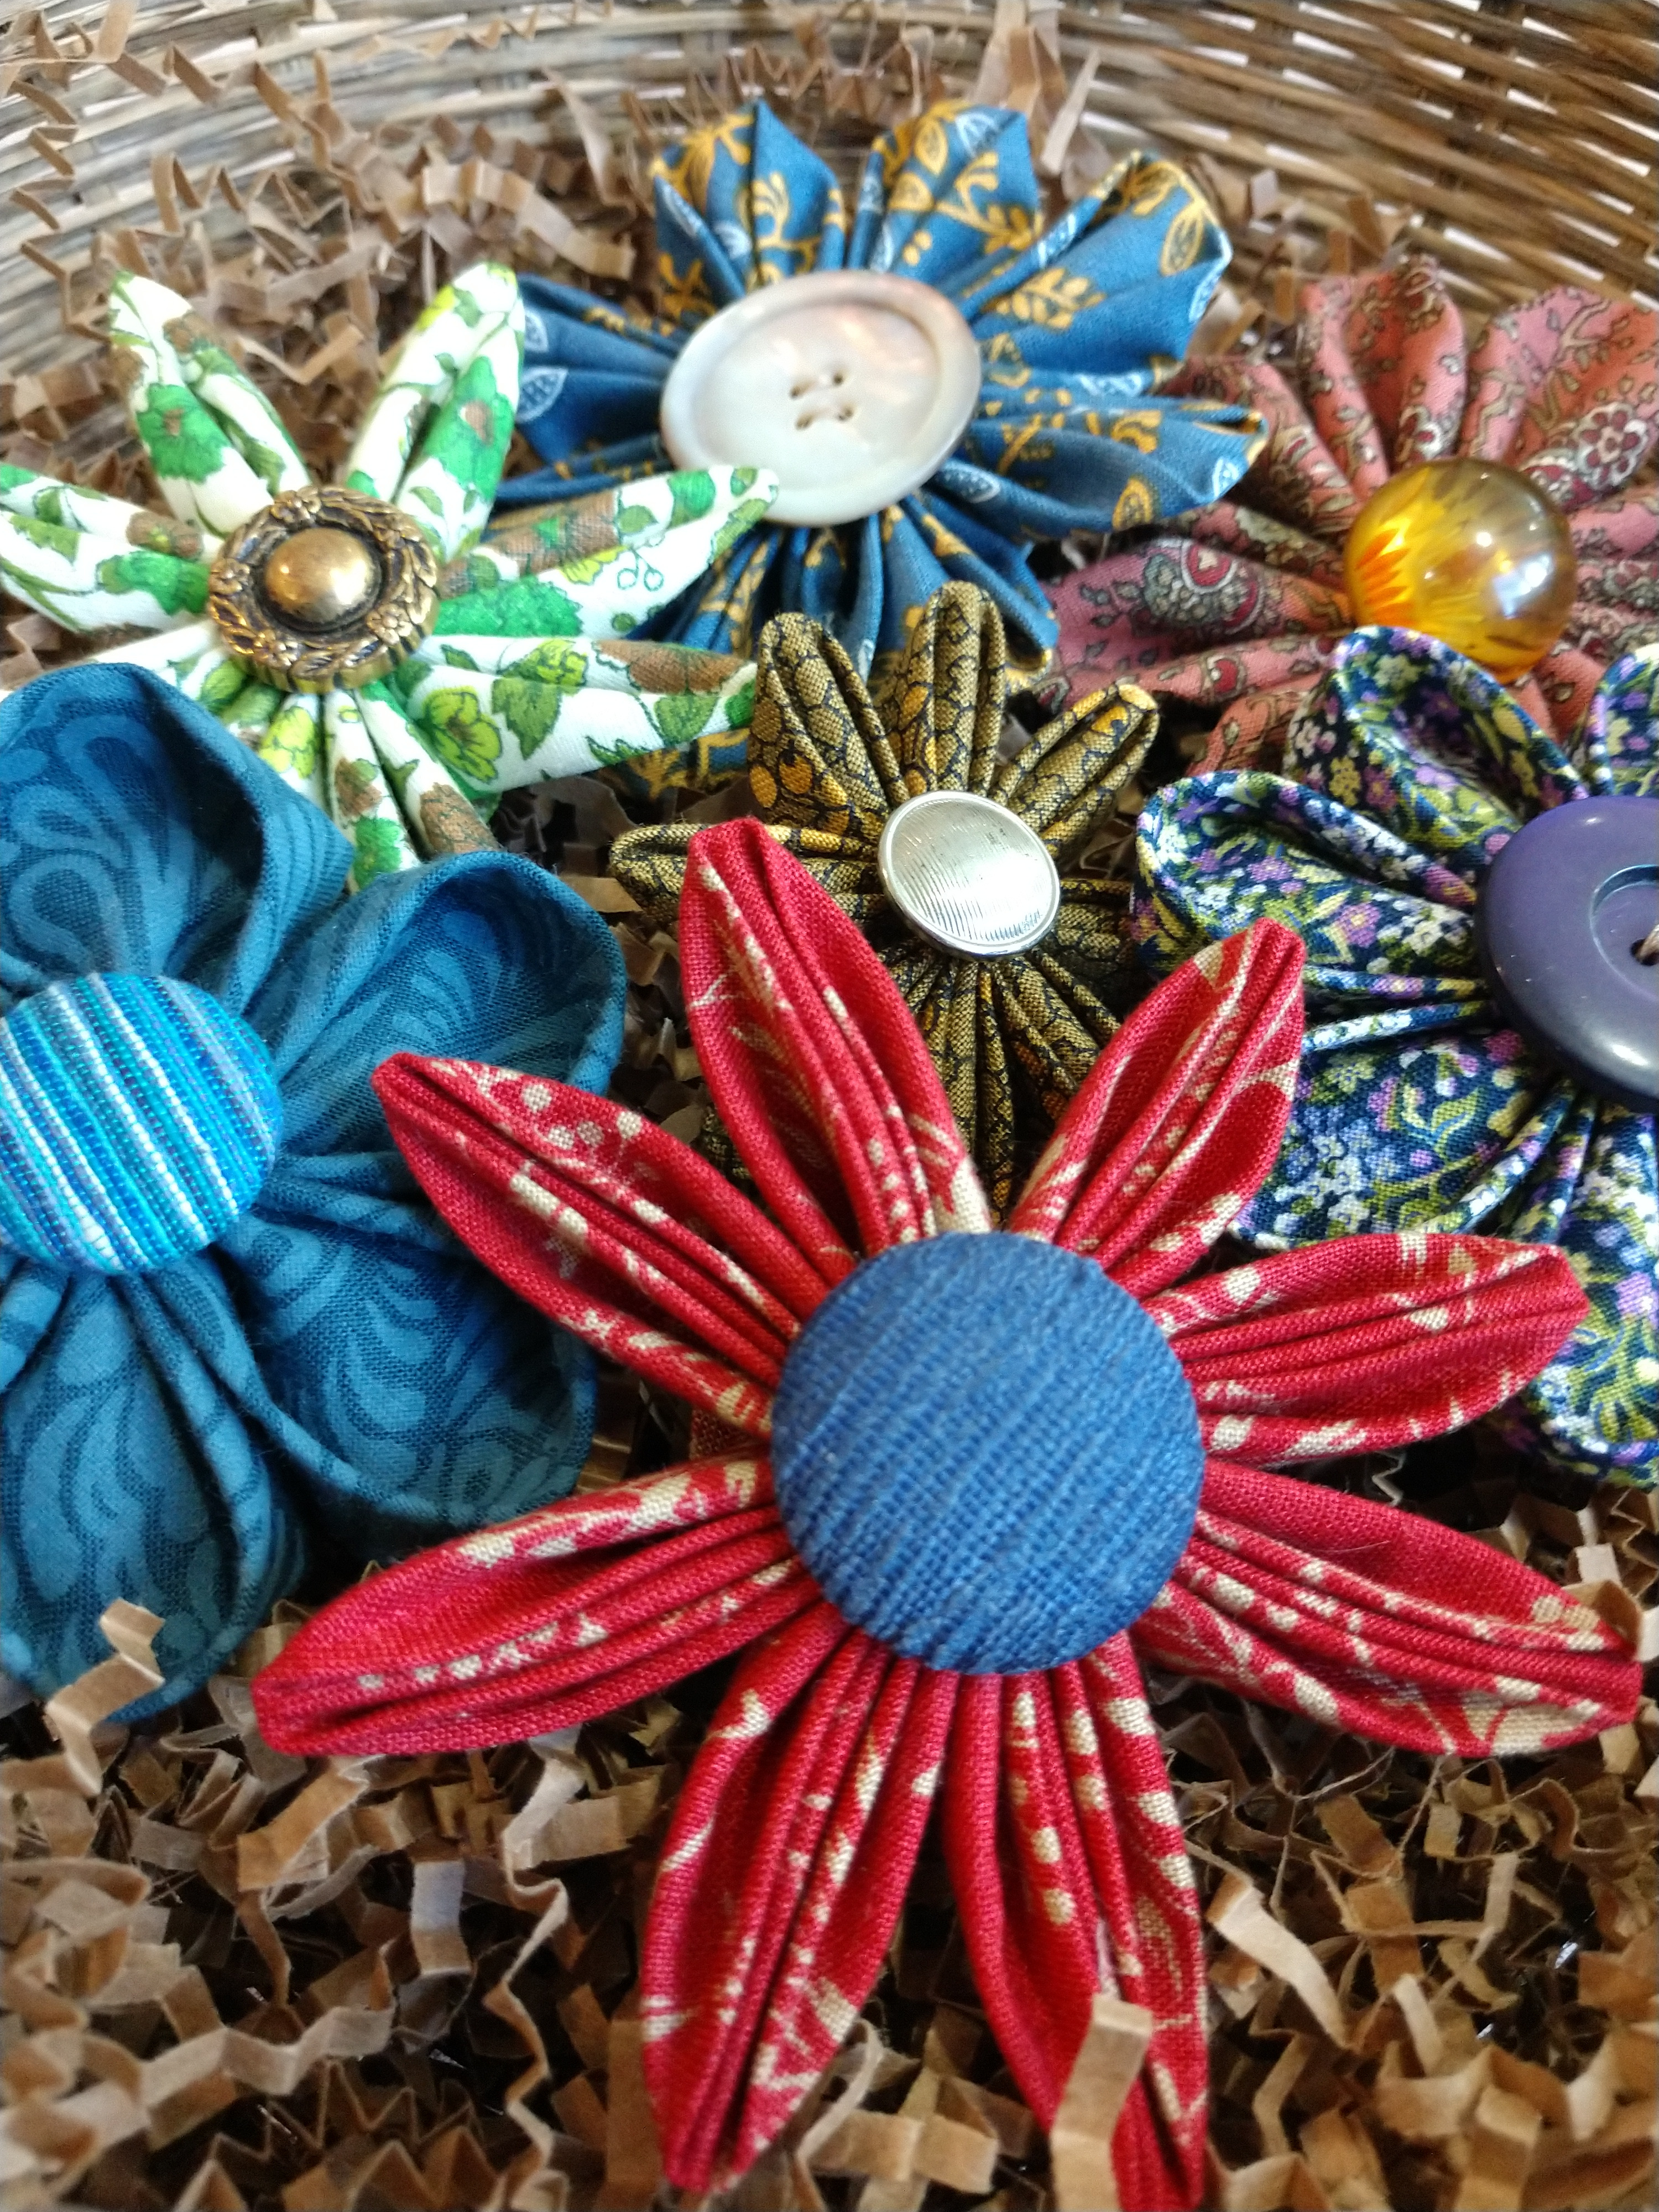 A photo of several possible fabric flower designs.